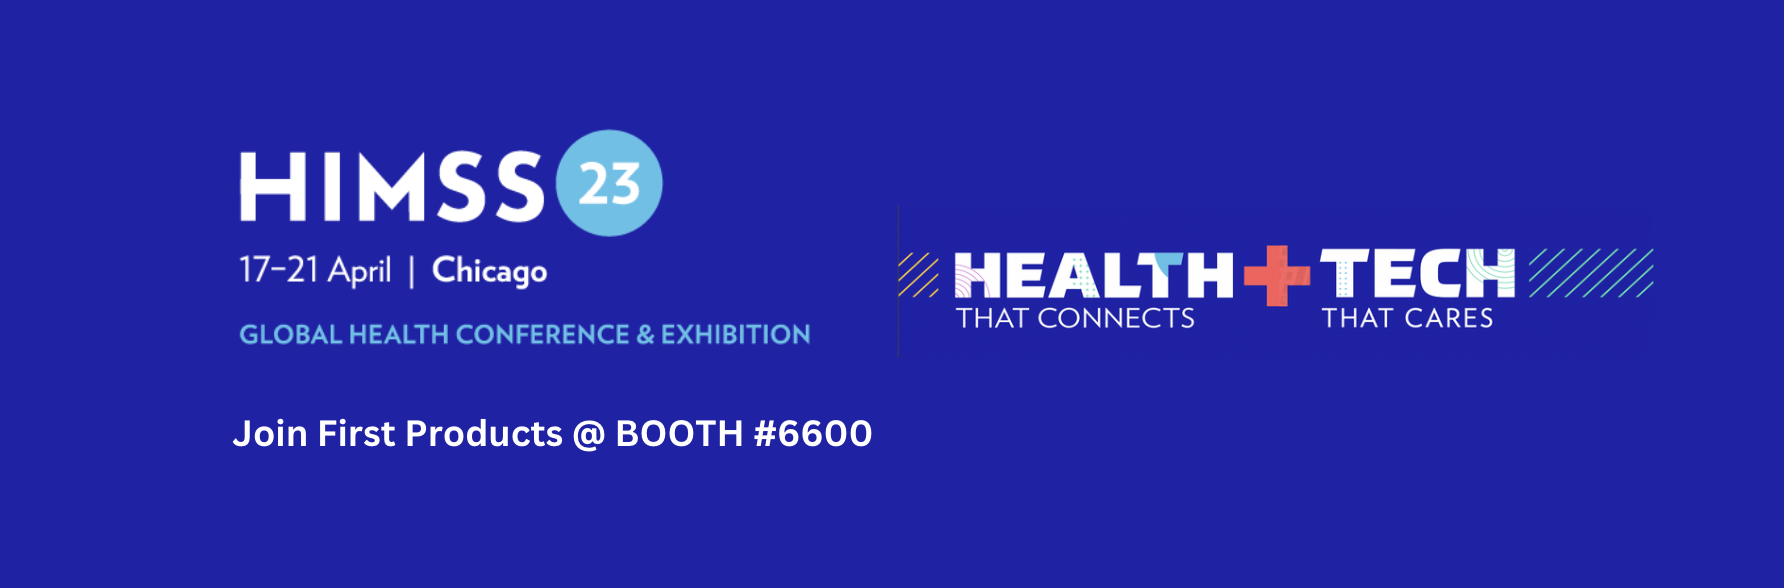 Digital Health Transformation - First Products Exhibiting at HIMSS23